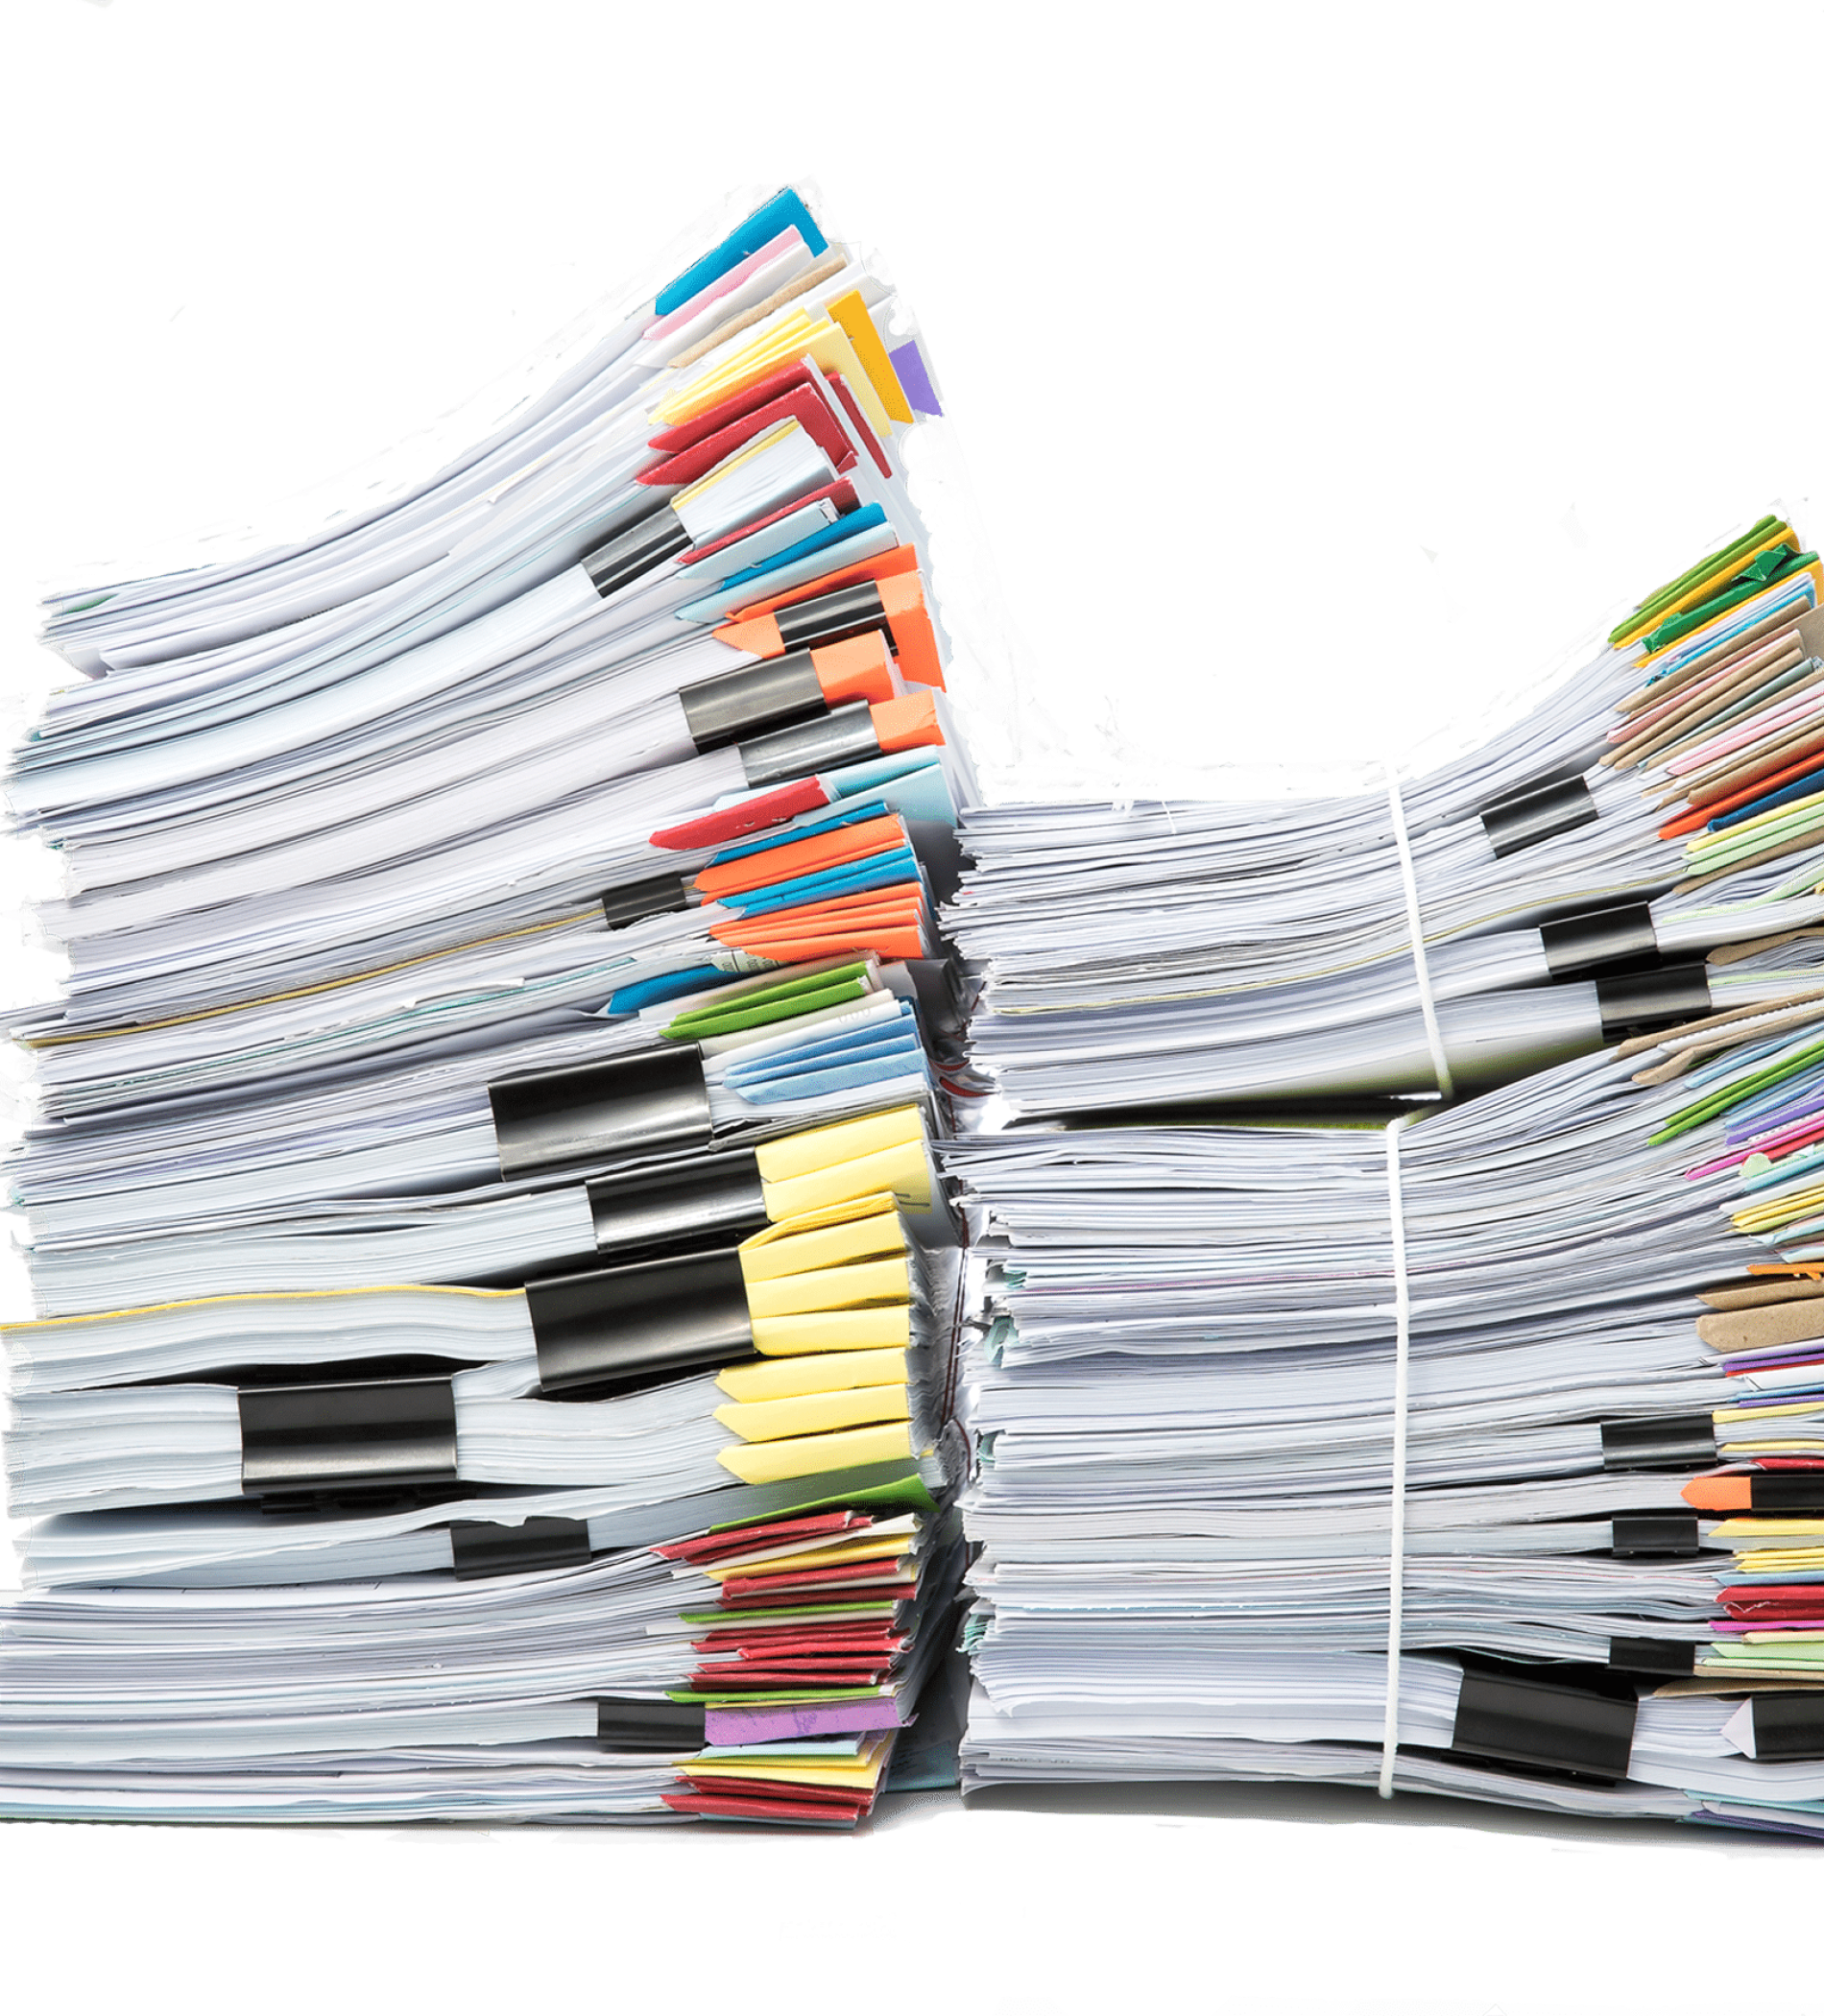 stack-of-documents-isolated-on-white-background-d-2022-09-29-15-05-28-utc